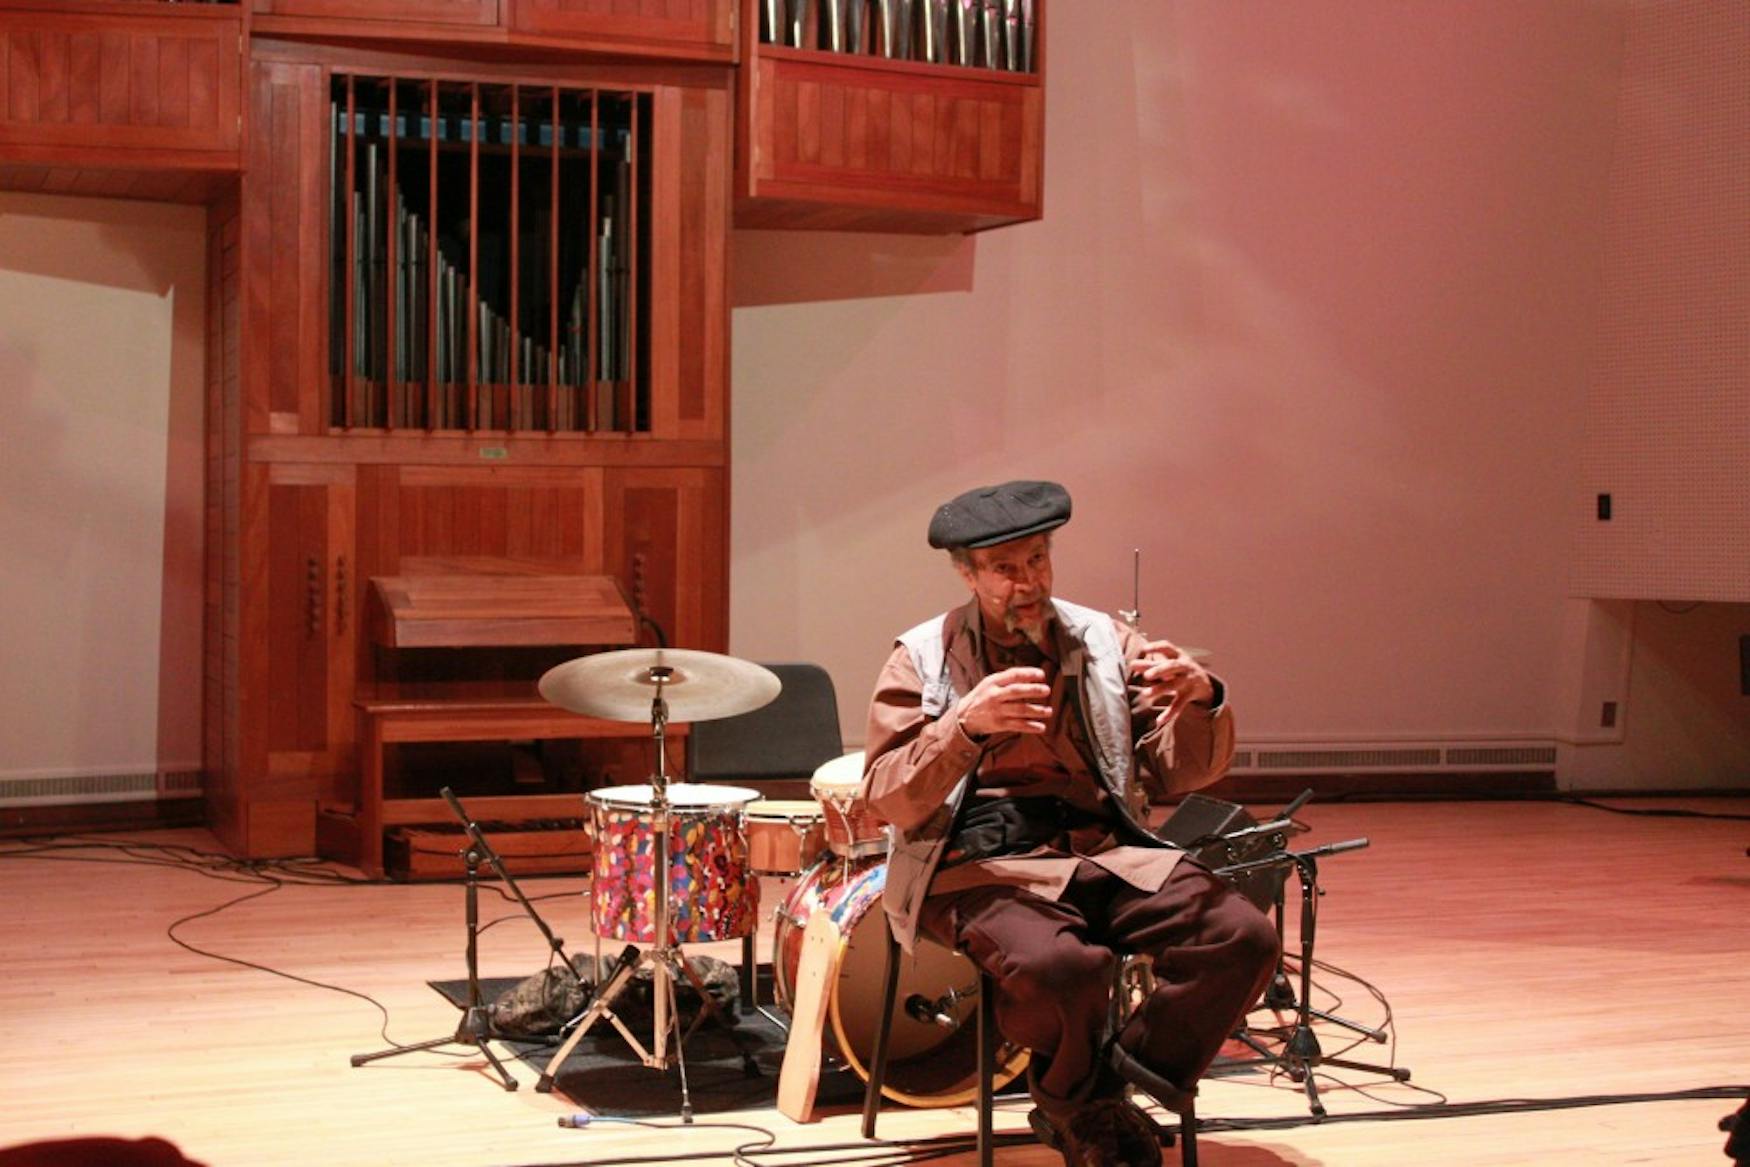 HITTING THE KEYNOTE: On Saturday, musician Milford Graves gave the keynote for the Improv Festival, telling personal stories.